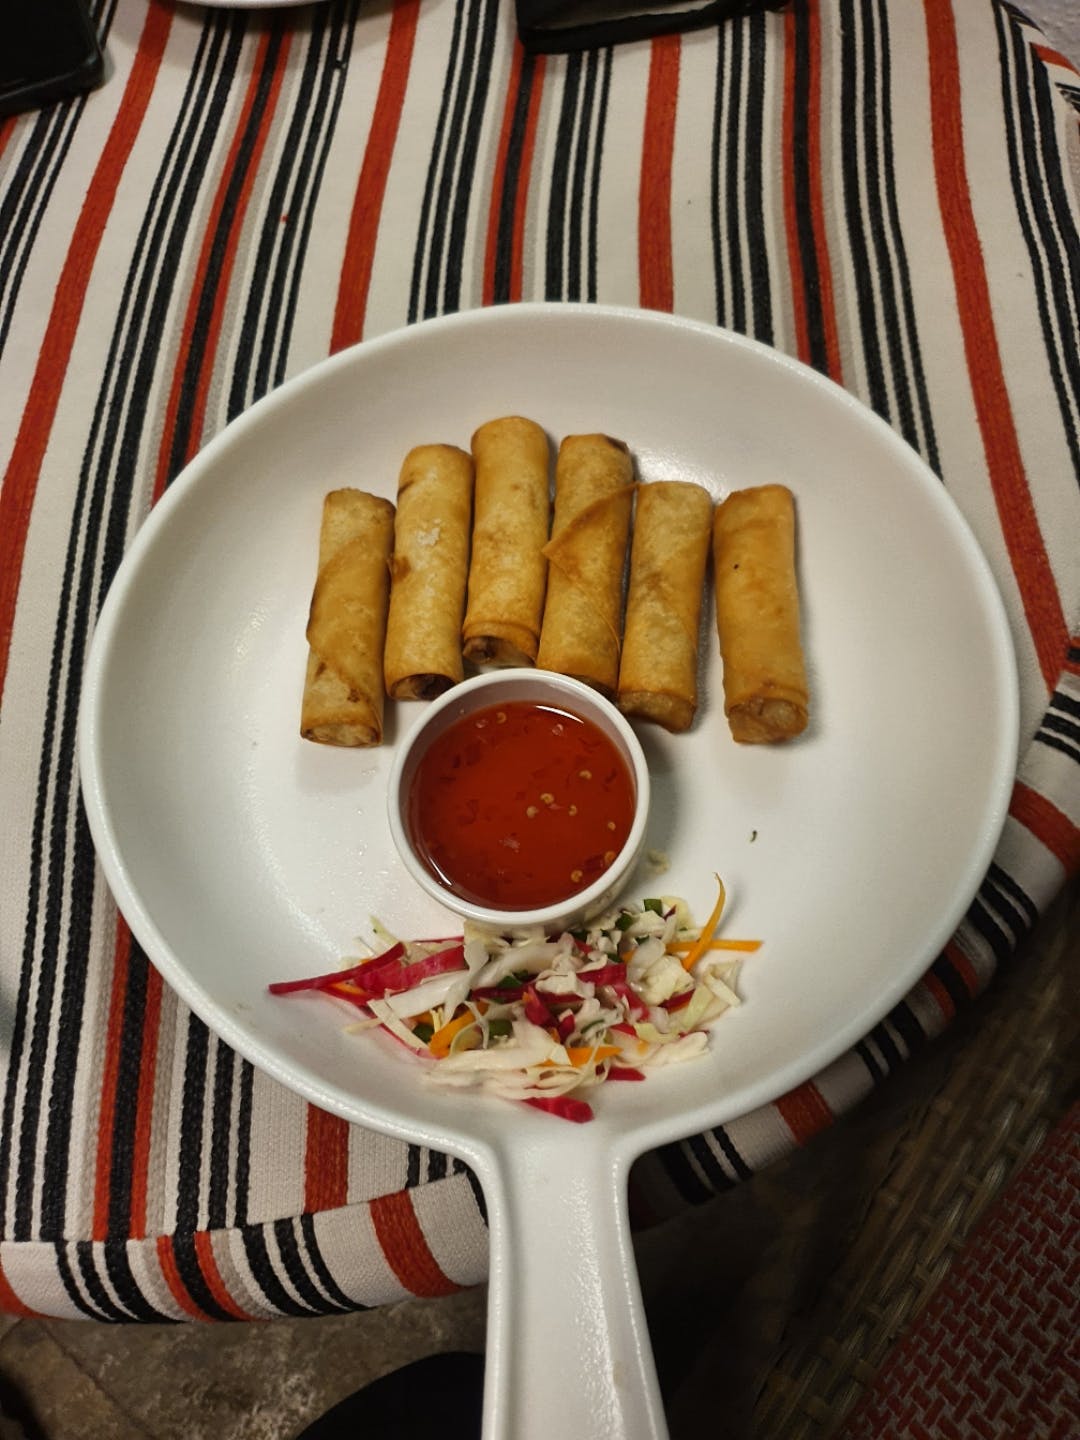 Dish,Food,Cuisine,Spring roll,Taquito,Lumpia,Ingredient,appetizer,Egg roll,Produce